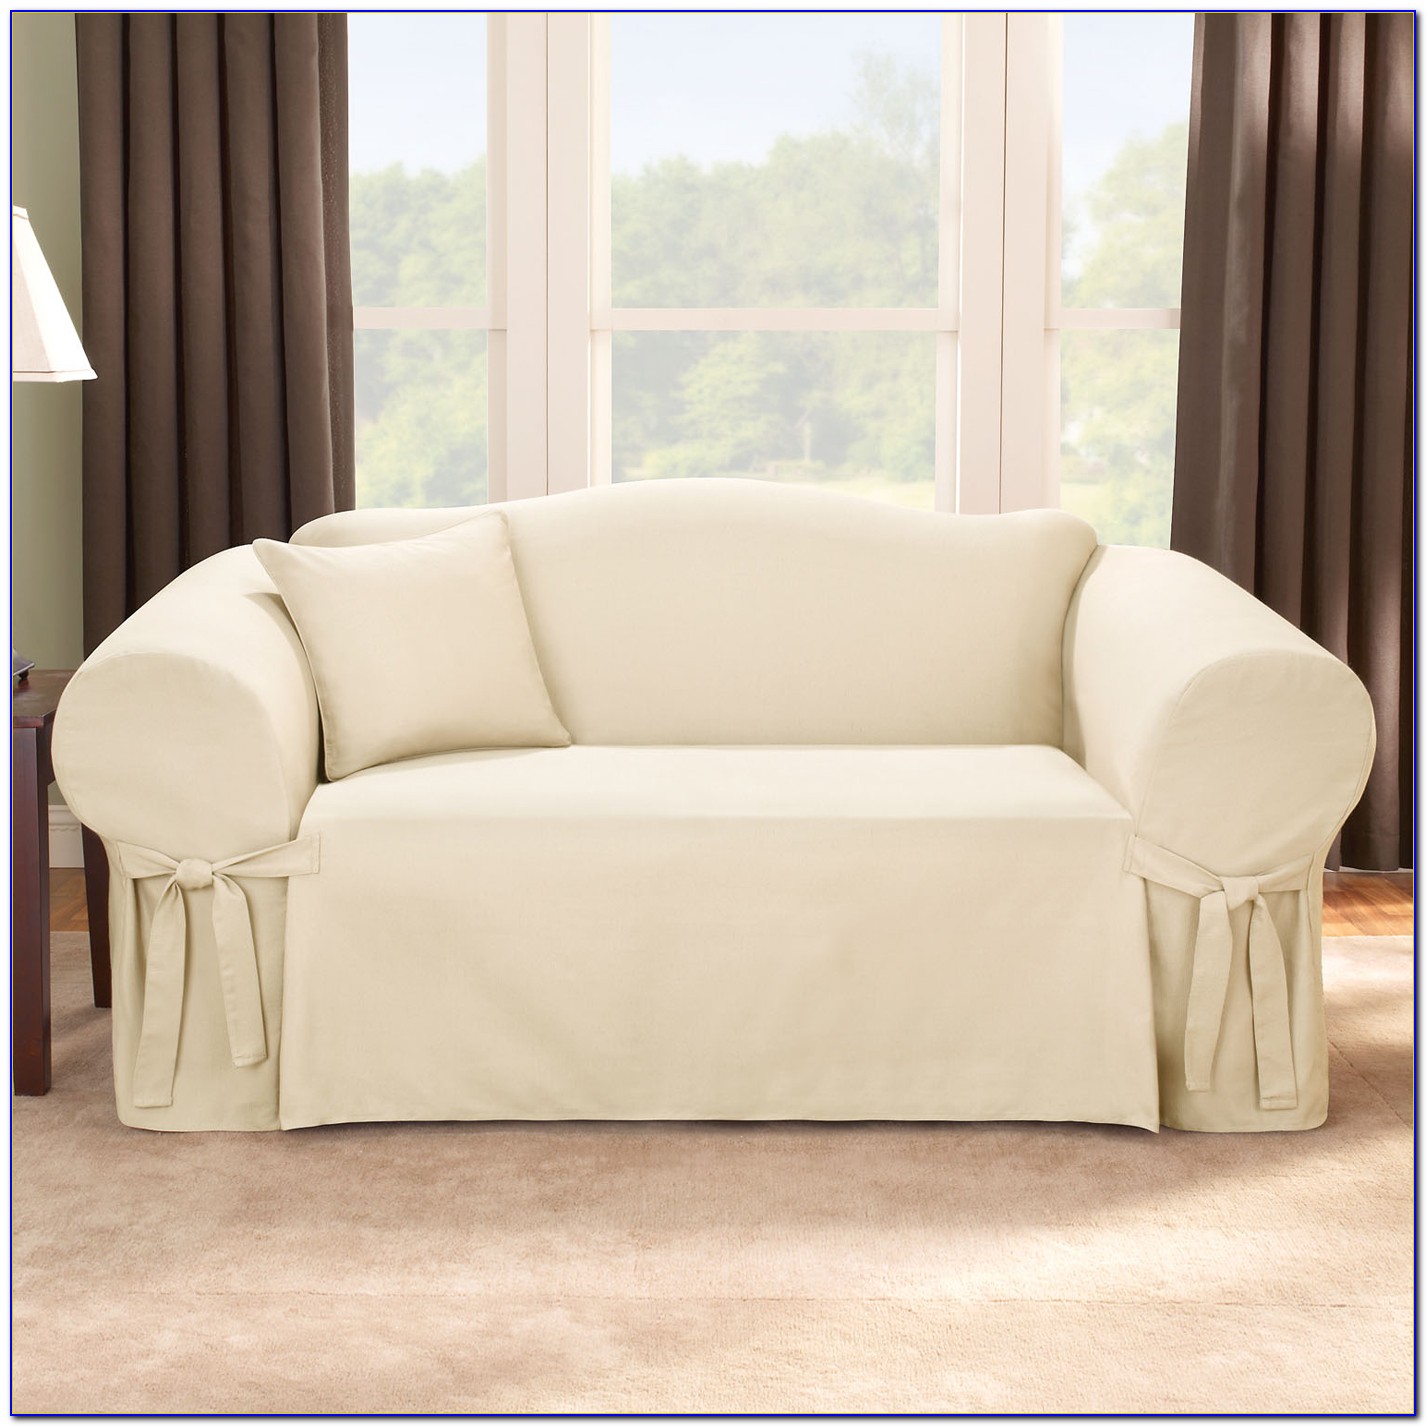 Sure Fit Slipcovers Sofa Classic Neutrals Cover